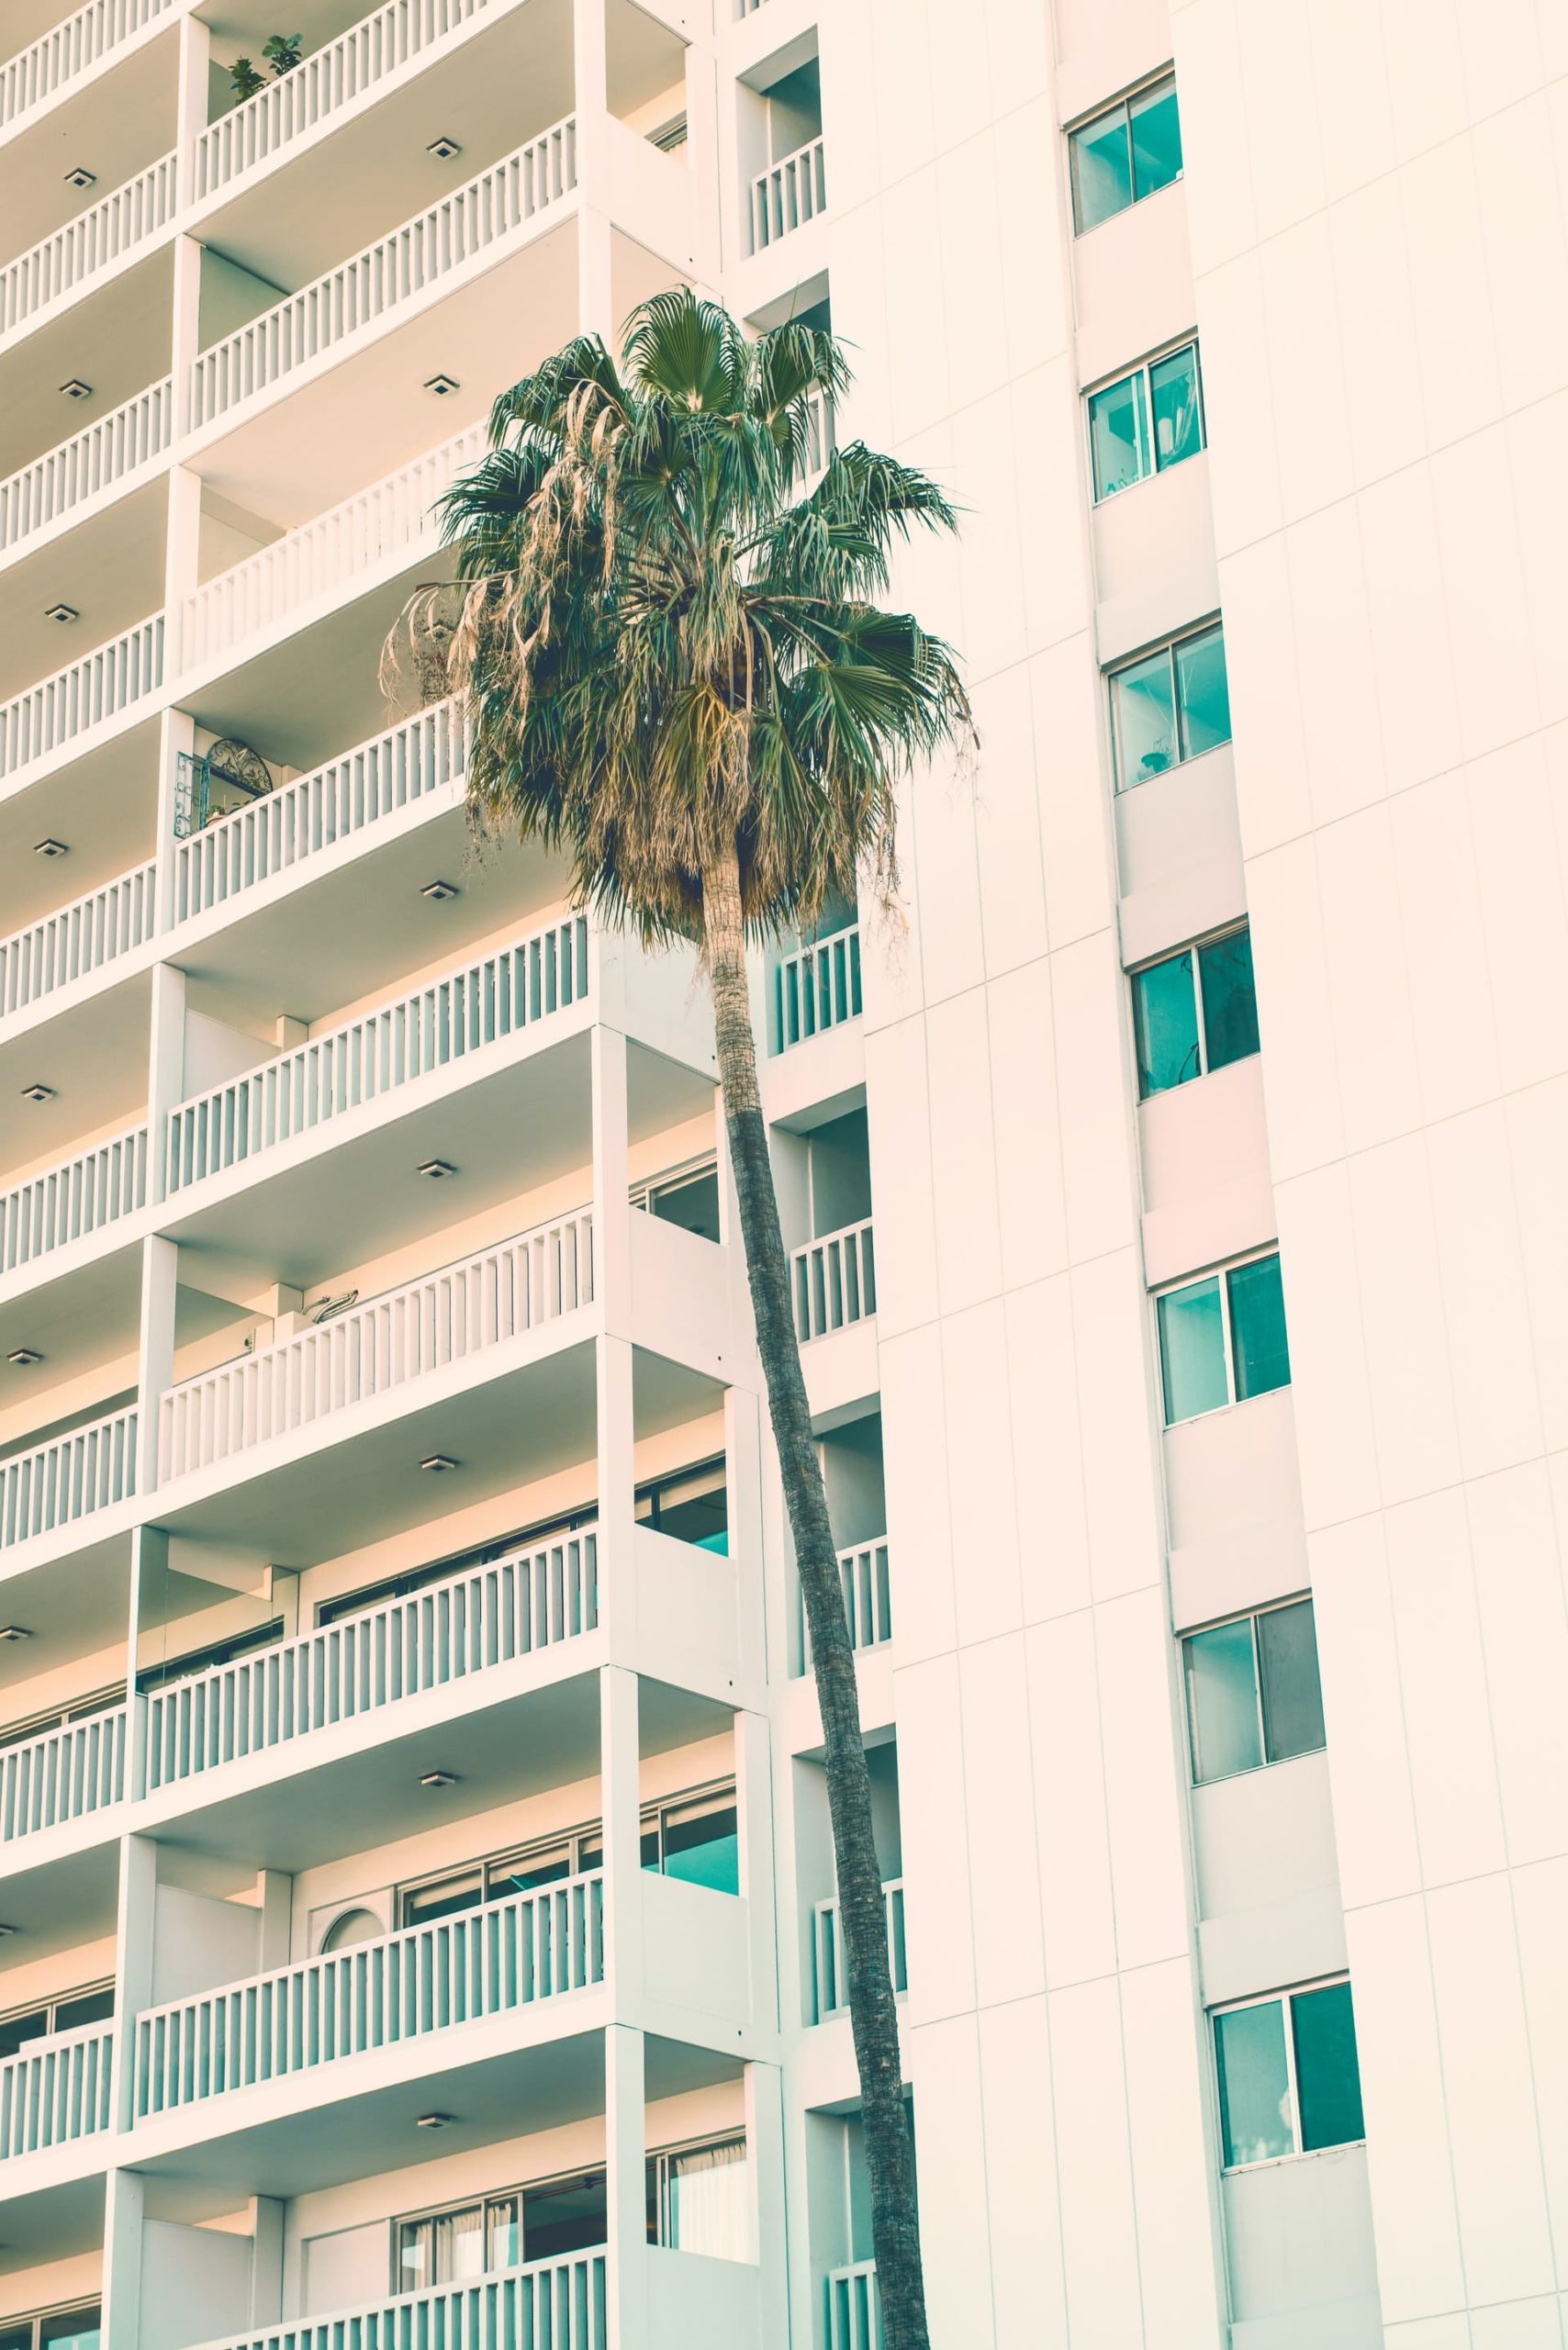 Multi-Family Properties: Less Risk but More Tenant Relations